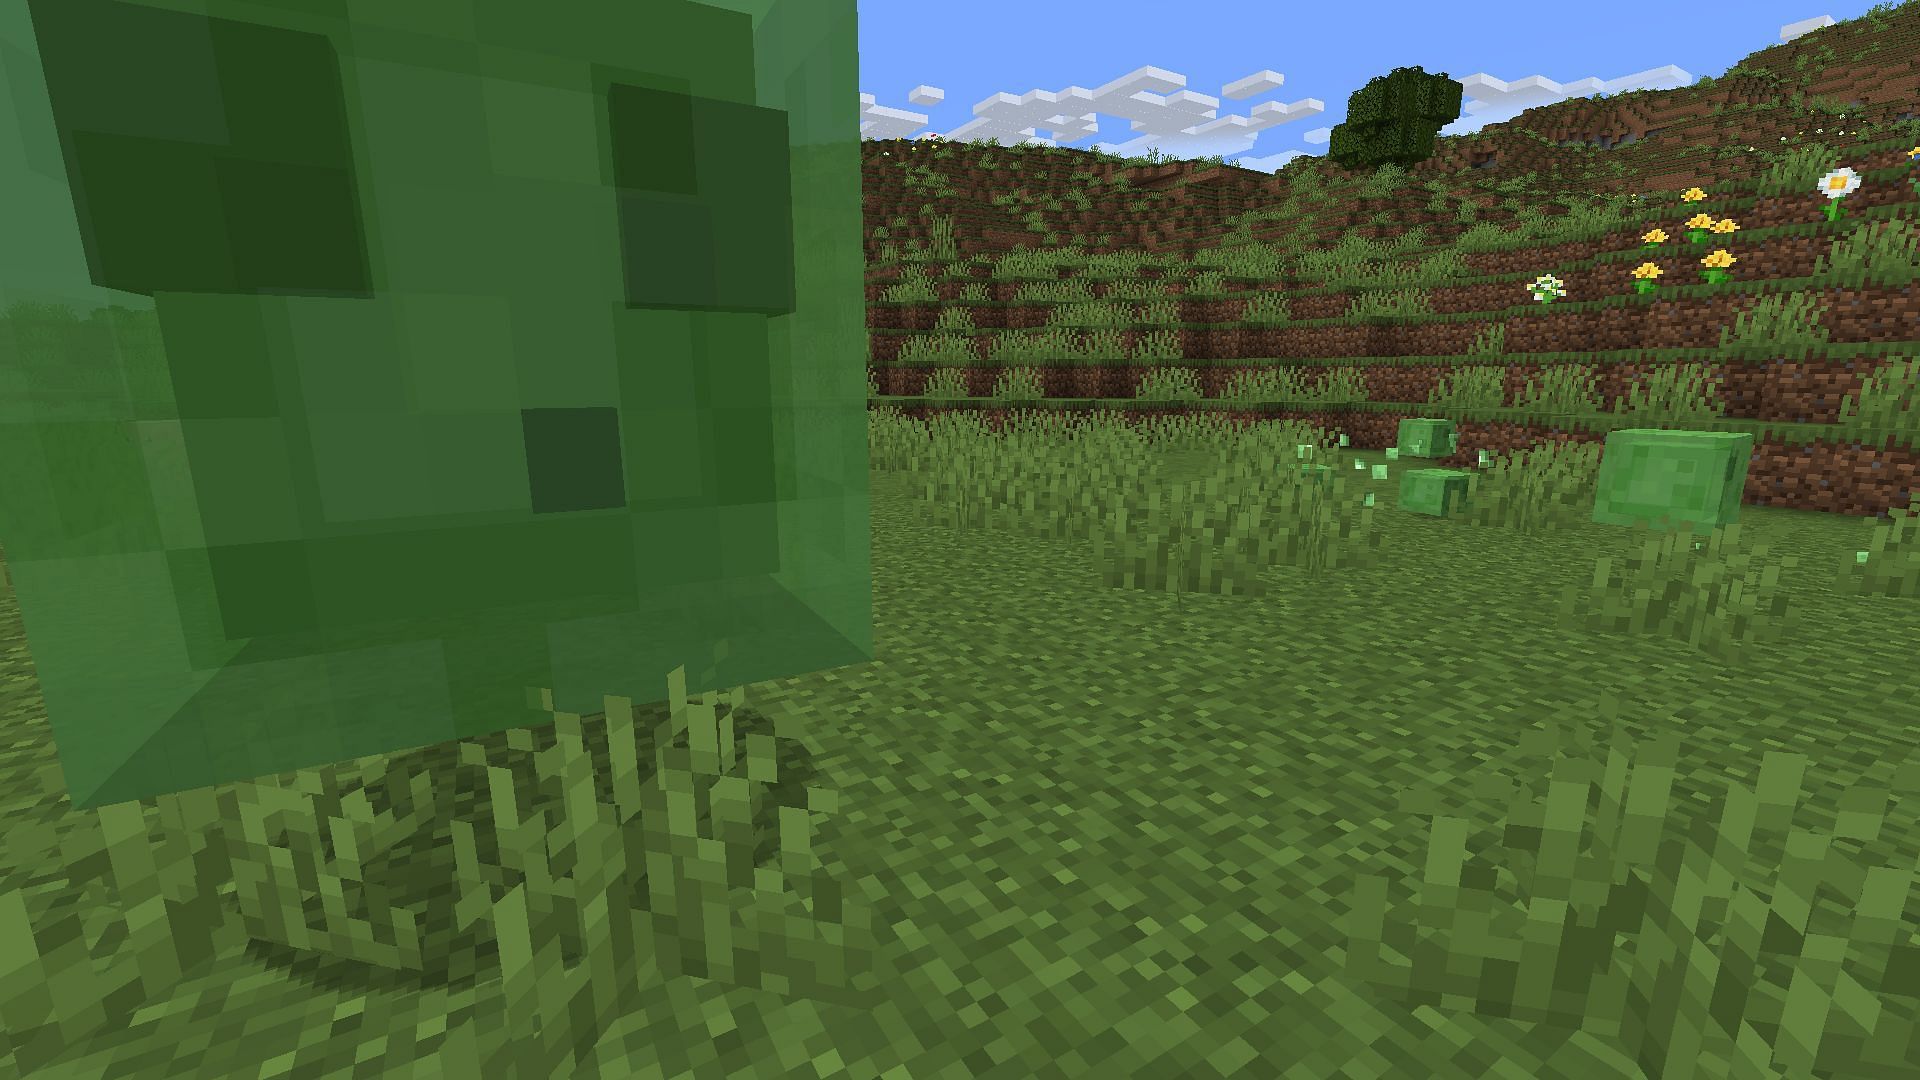 Slimes in a plains biome (Image via Minecraft)